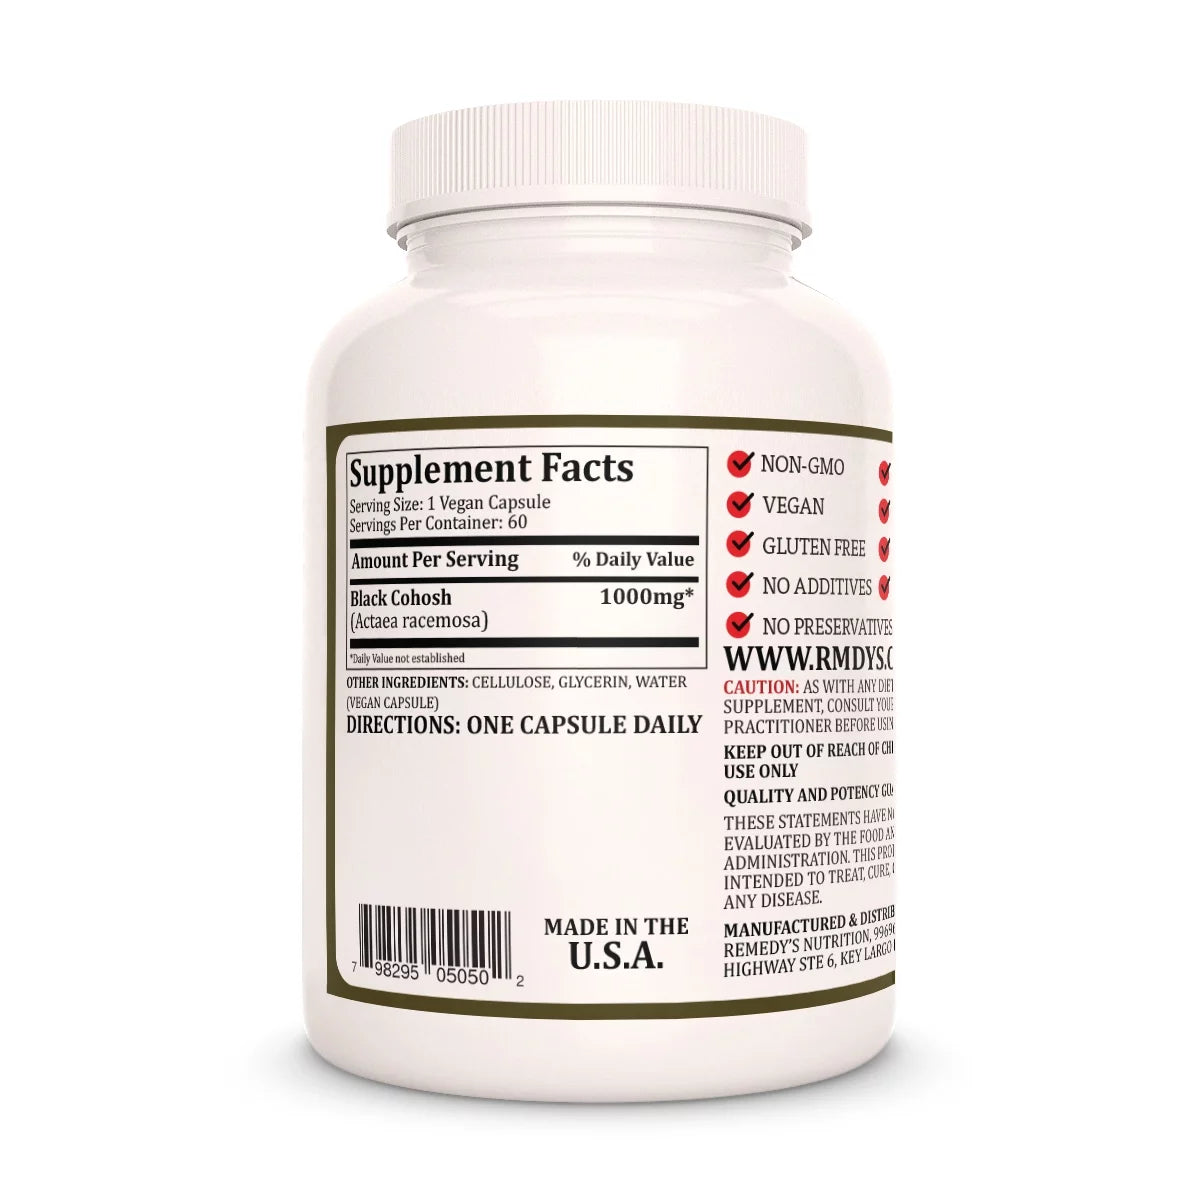 Image of Remedy's Nutrition® Black Cohosh Capsules Dietary Supplement front bottle. Made in the USA. Actaea racemosa